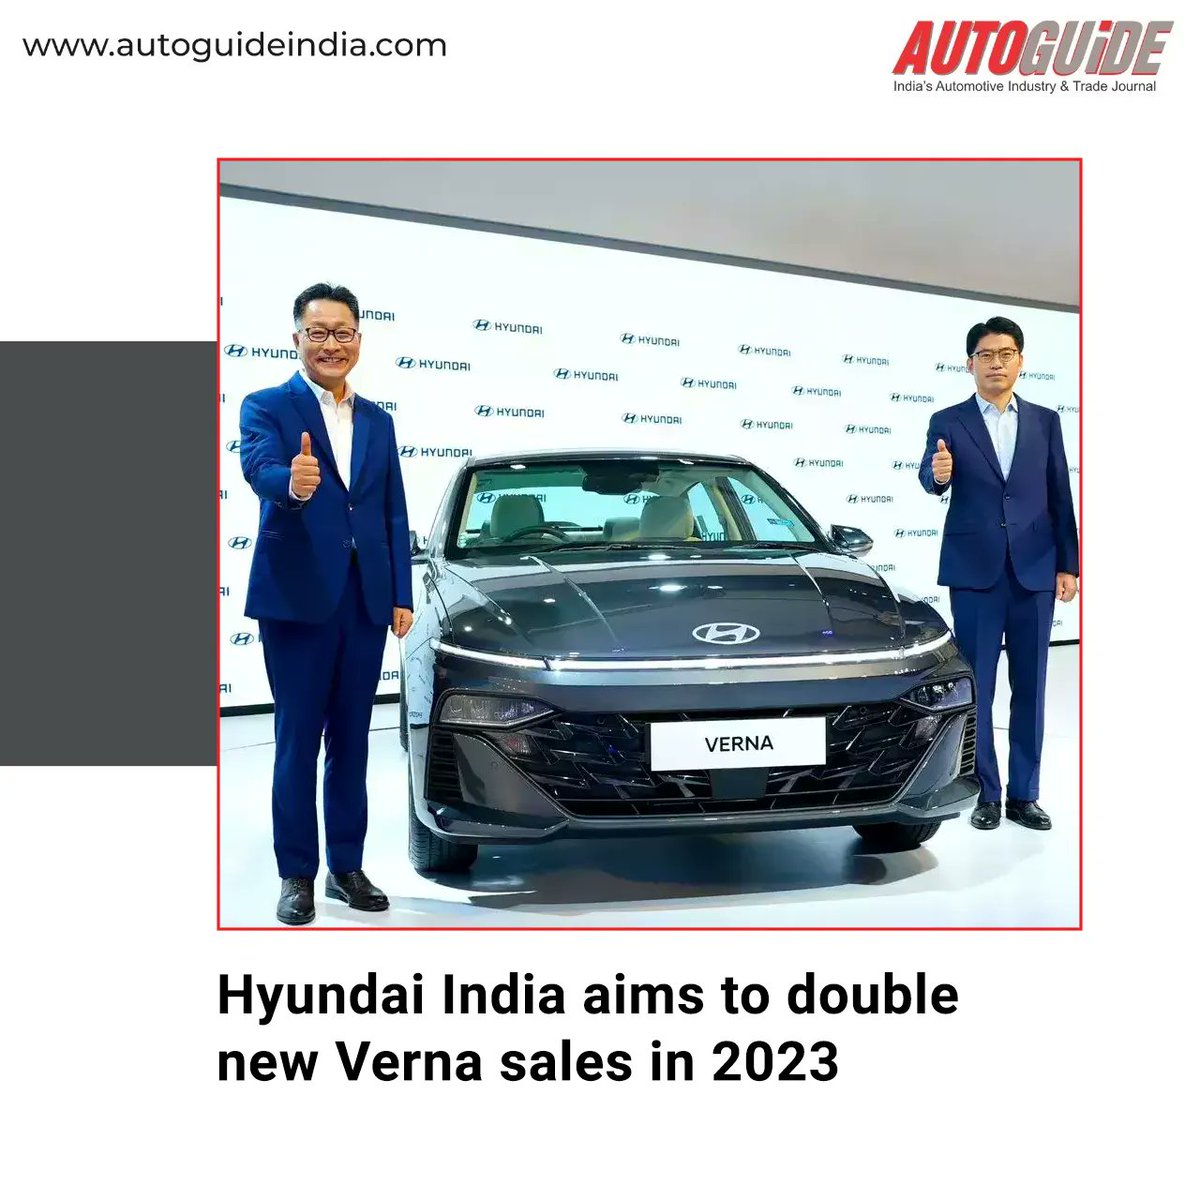 buff.ly/3m0duzQ 
With new features and futuristic design, the company is confident that it can double the sales of Verna this year as it has received 8,000 bookings in one month. 

Read more on the website, link on top 
#verna #futuristicdesign #car #bookingopen #autonews